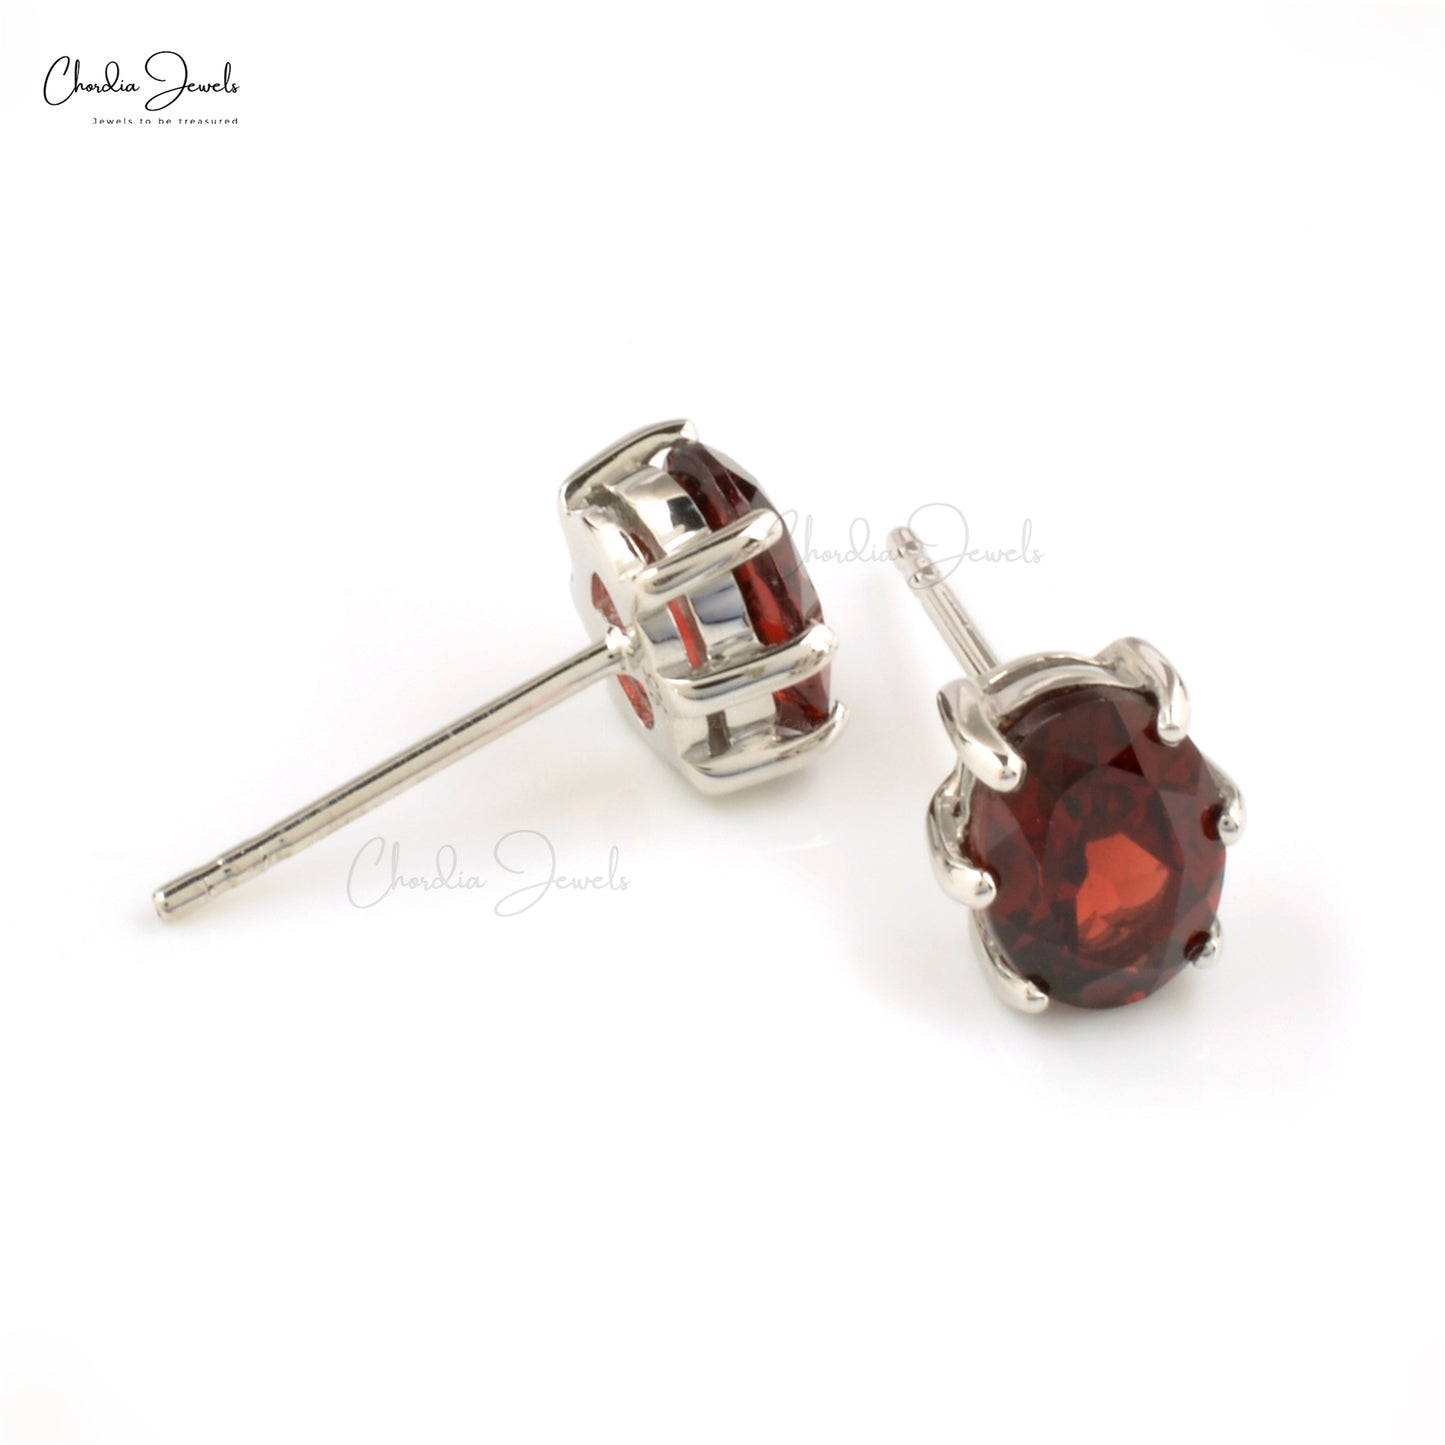 High Quality Jewelry In 925 Sterling Silver Real Garnet Gemstone Oval Shape Stud Earrings At Wholesale Price